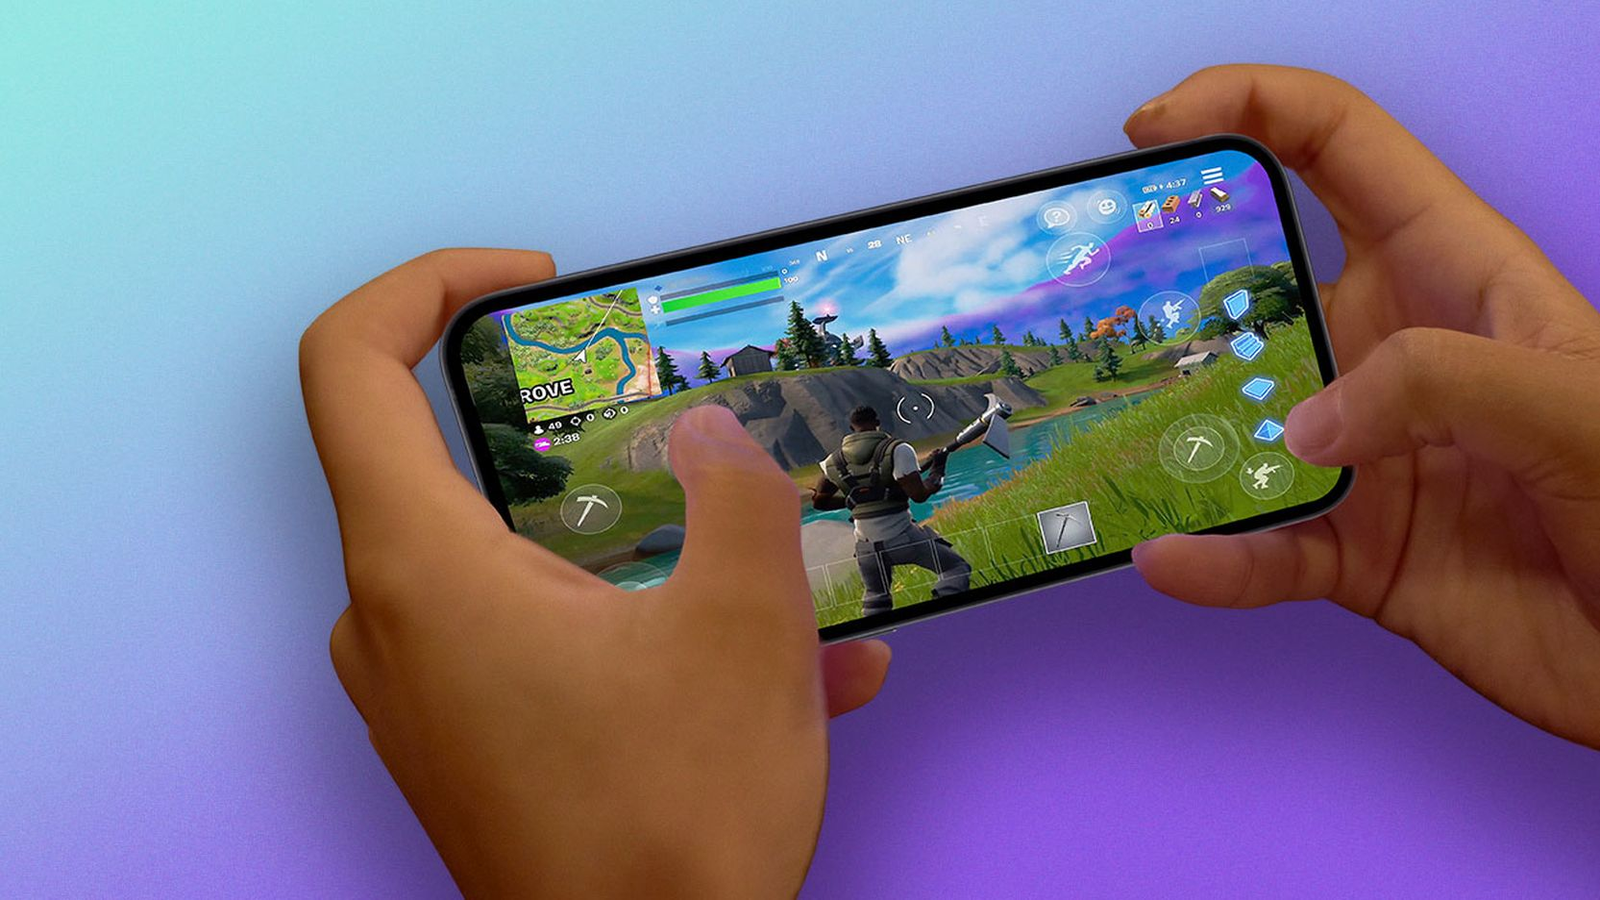 Fortnite Now Free on iPhone With Xbox Cloud Gaming